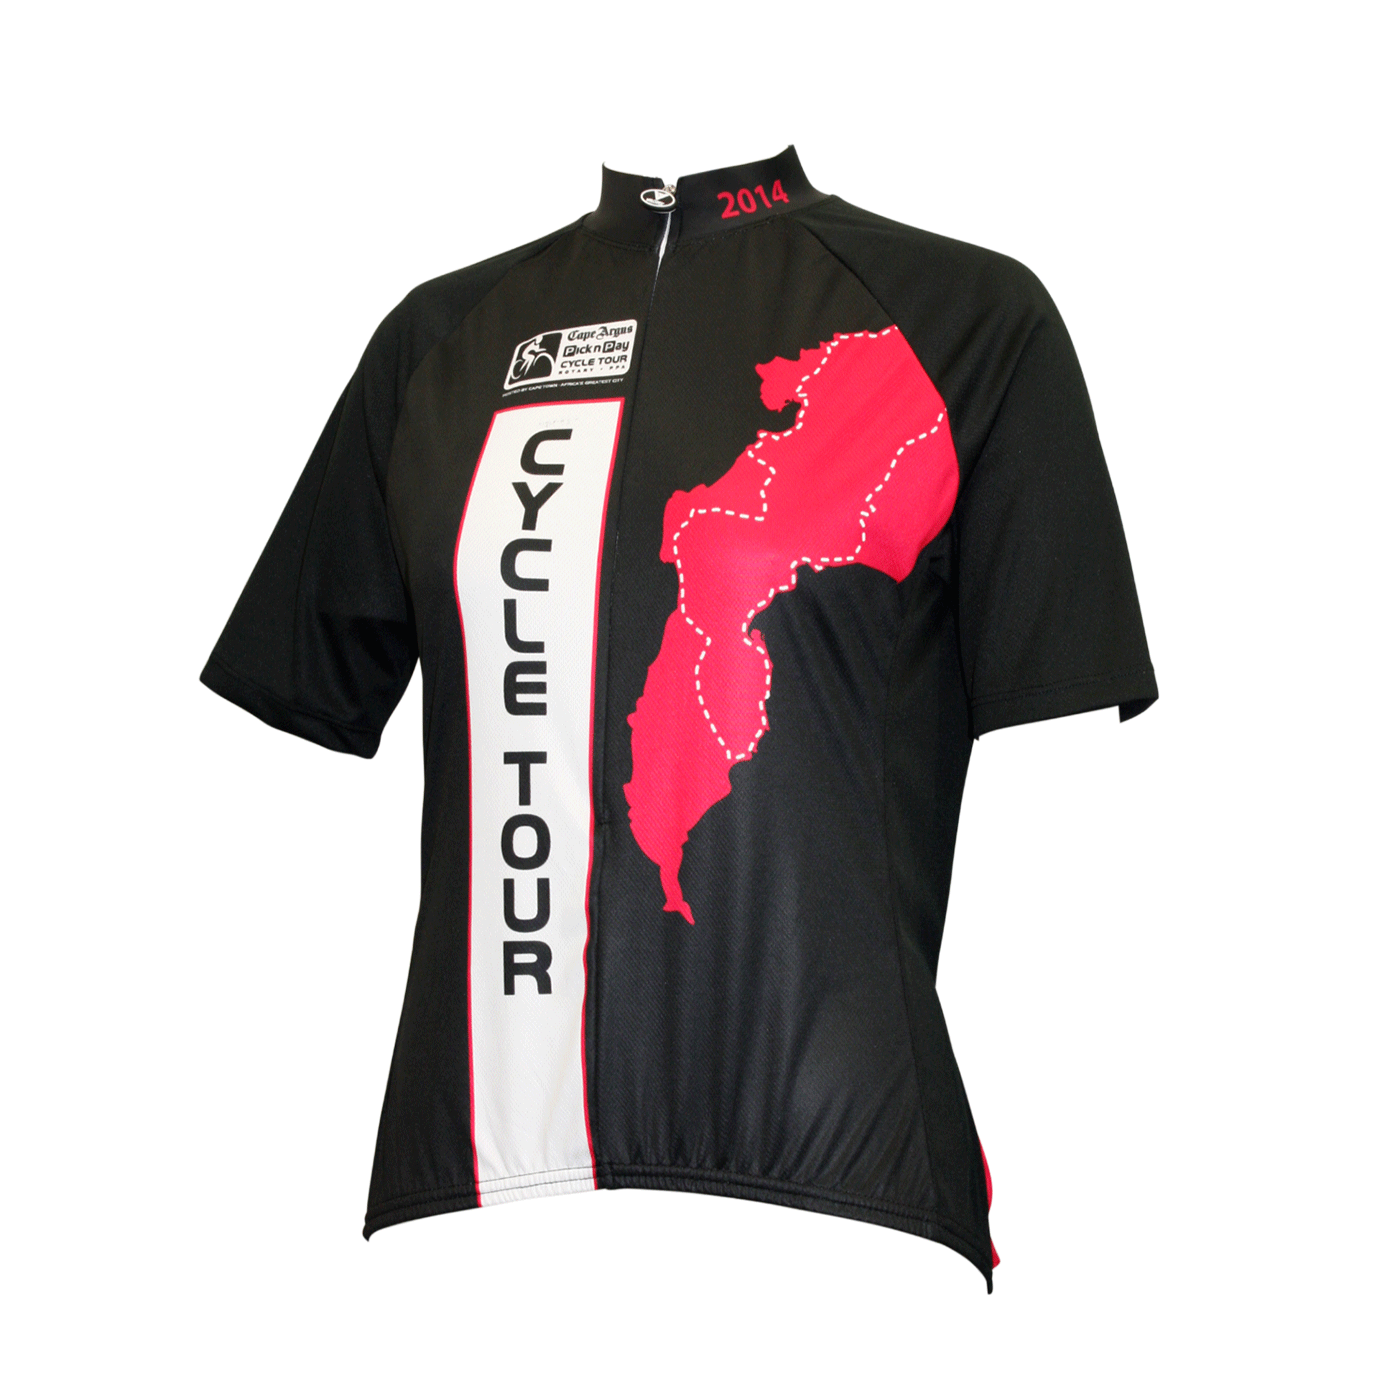 2014 Cycle Tour Cycling Jersey Ladies Vento